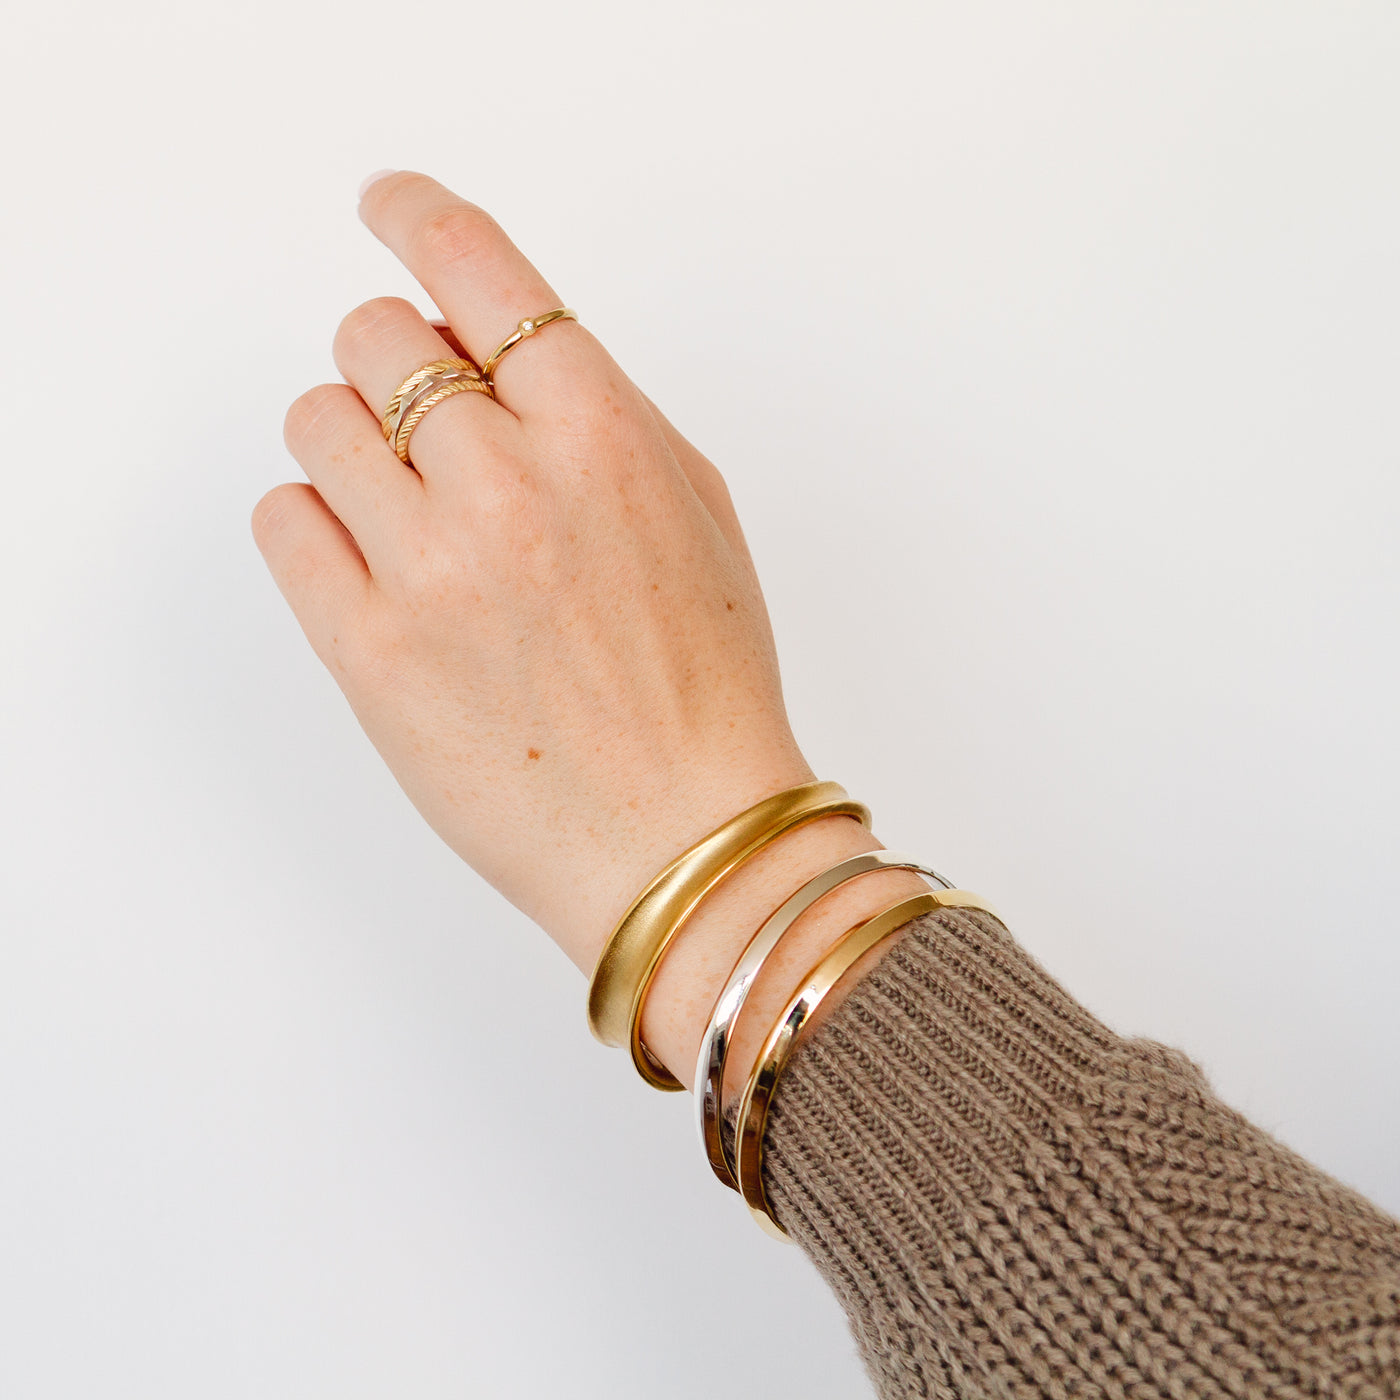 A hand wearing gold rings and the bronze ebb cuff on her wrist with a silver and bronze aura bangle